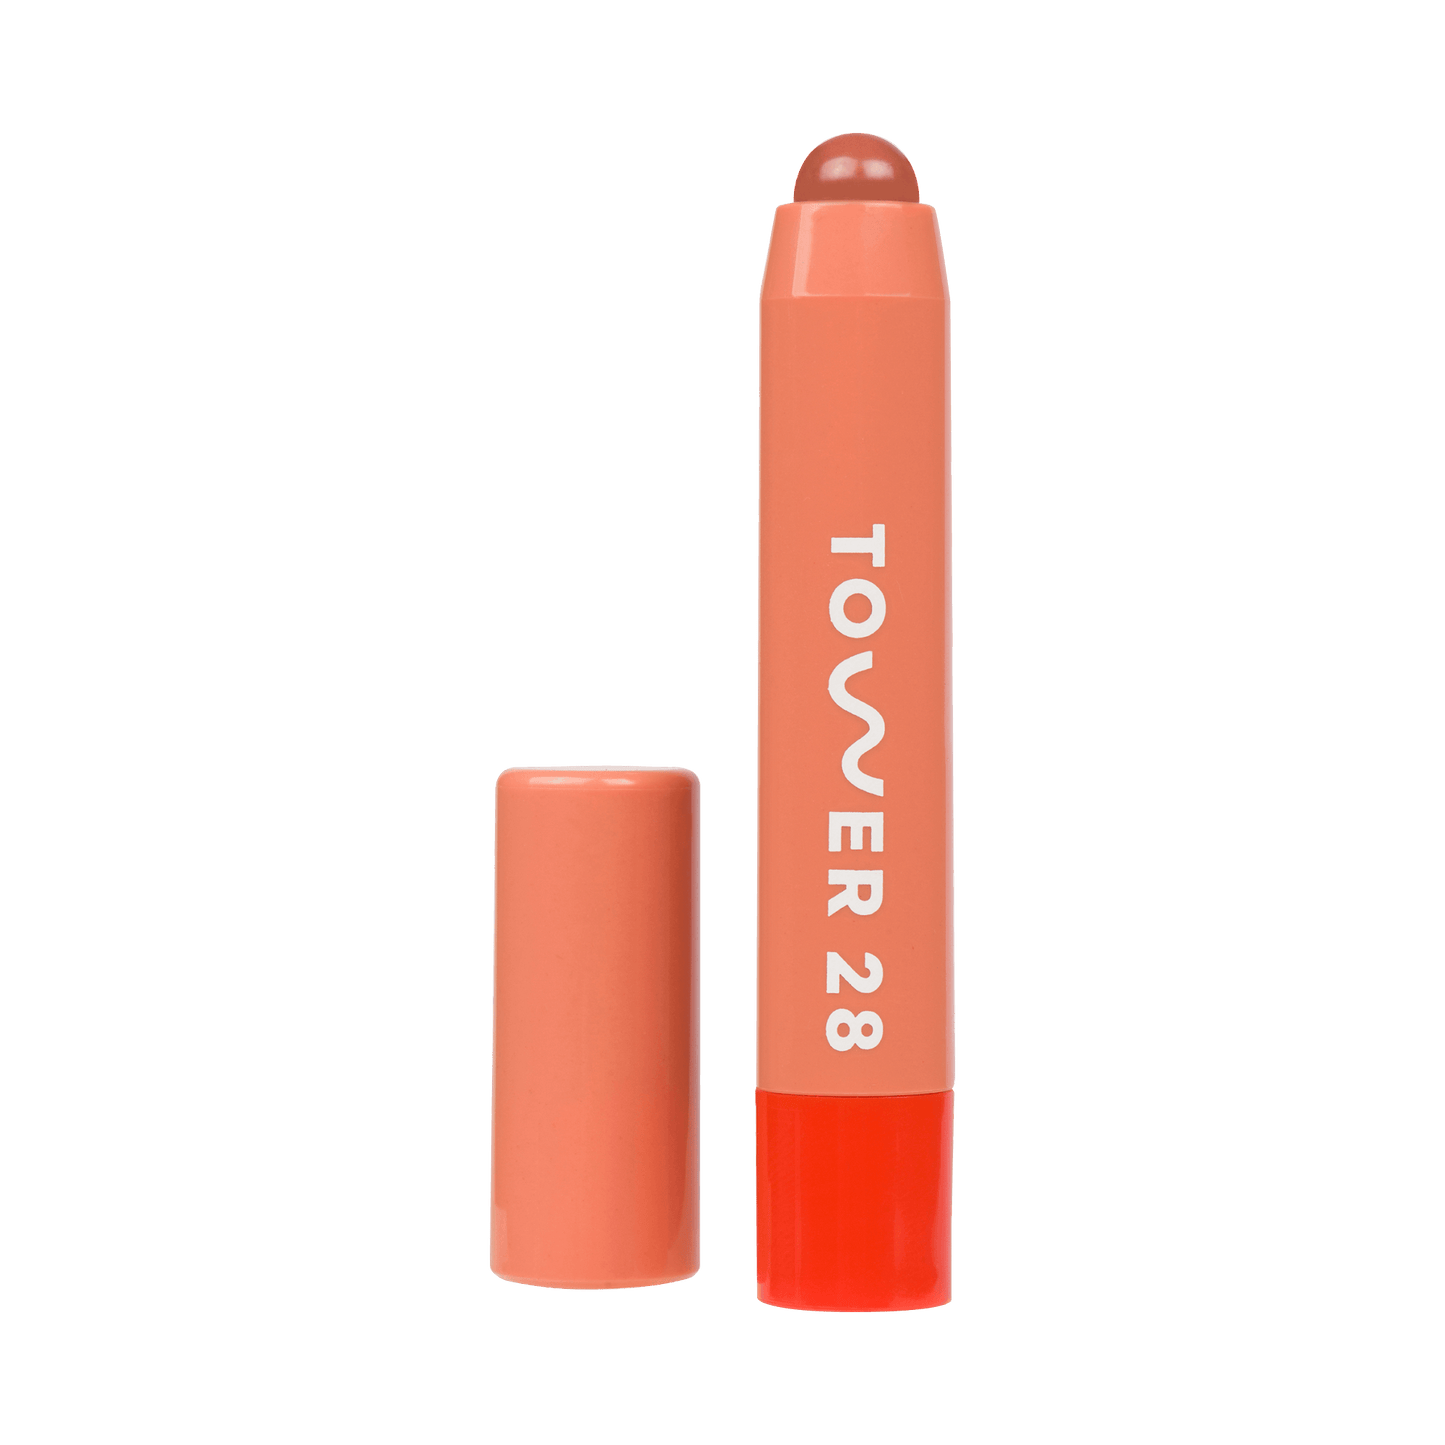 Shade: Mix [Tower 28 Beauty's JuiceBalm Lip Balm in the shade Mix]